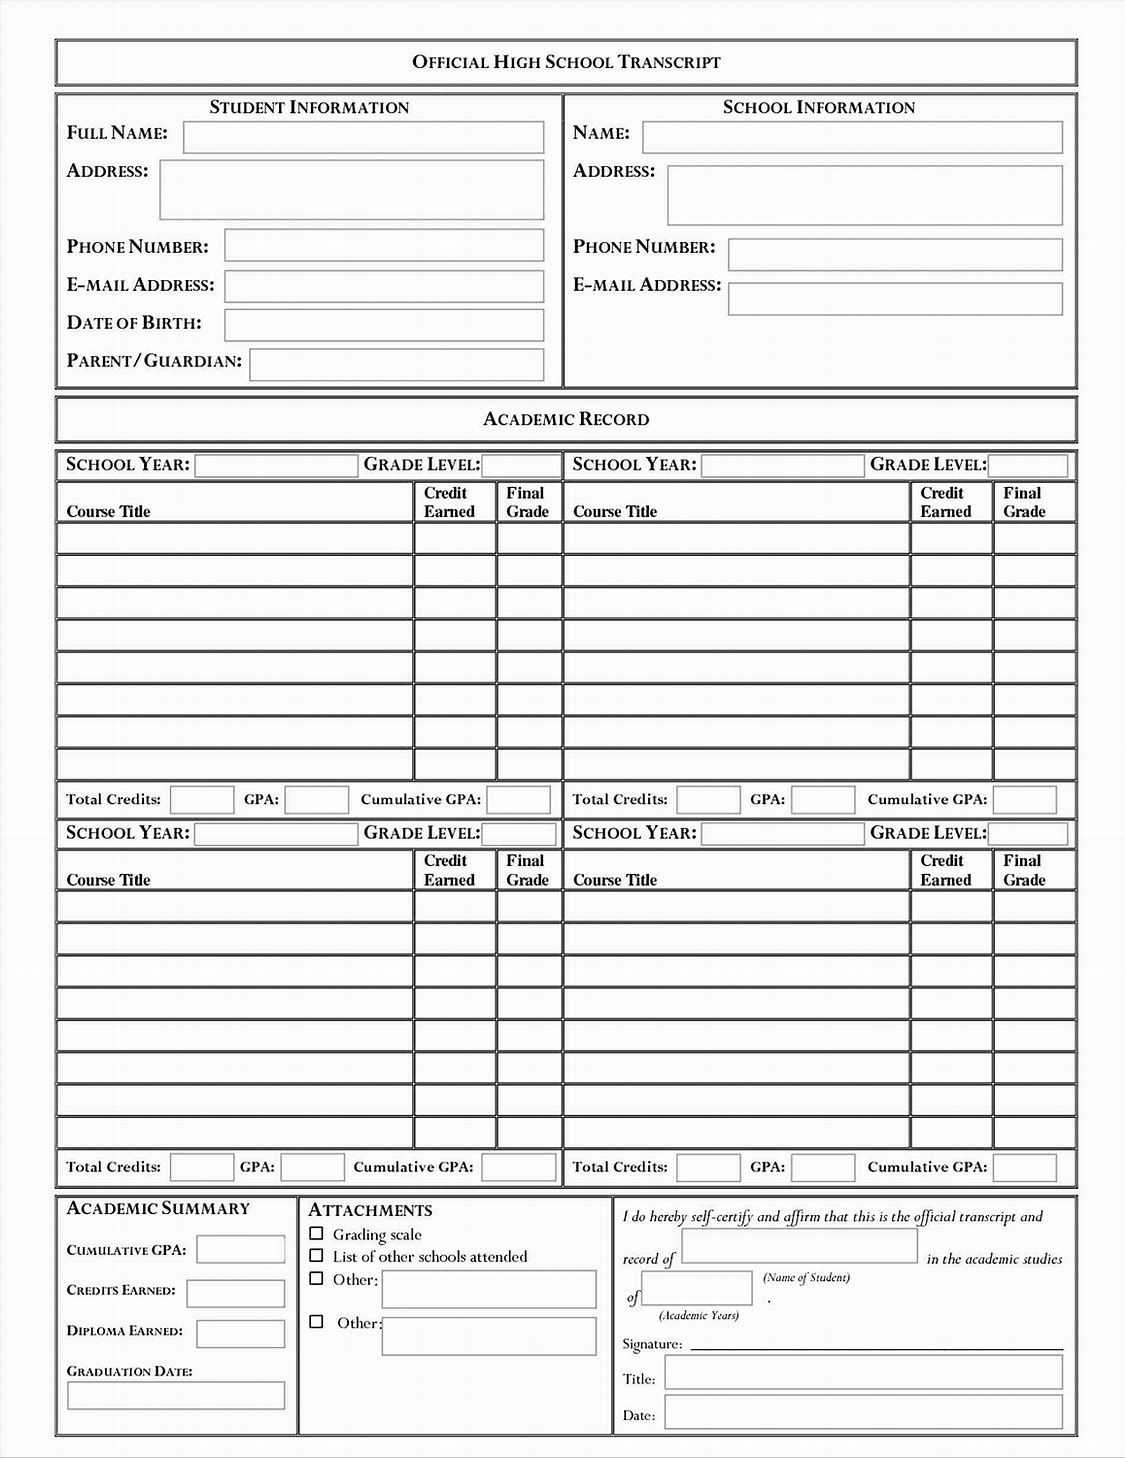 Image Result For Middle School Transcript Template | High Regarding Middle School Report Card Template